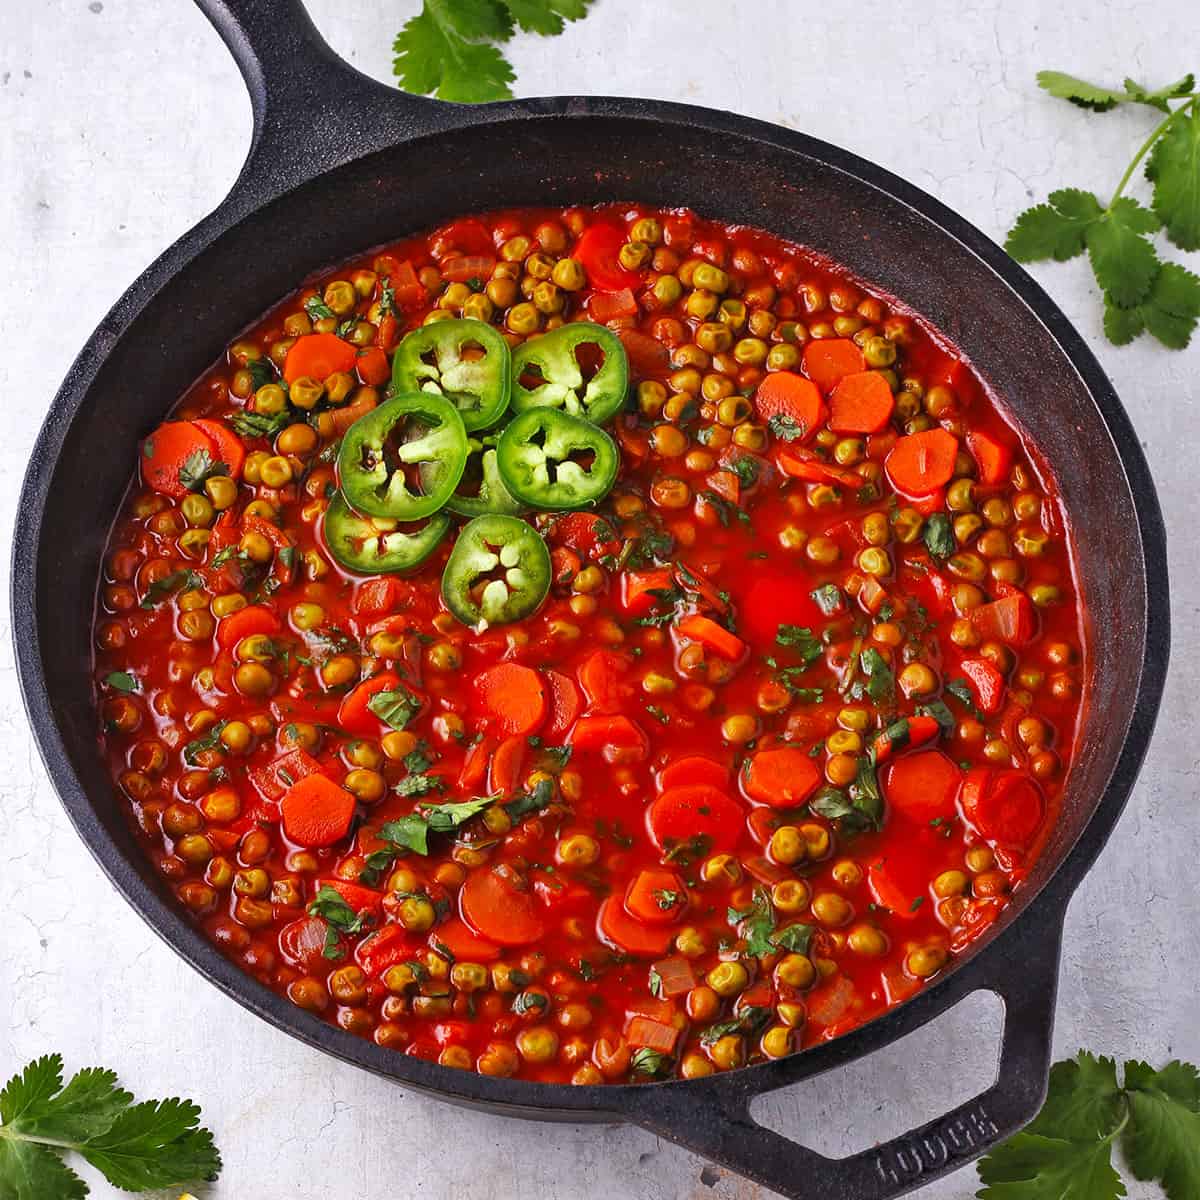 Pea stew with carrots in tomato sauce in a black pan.